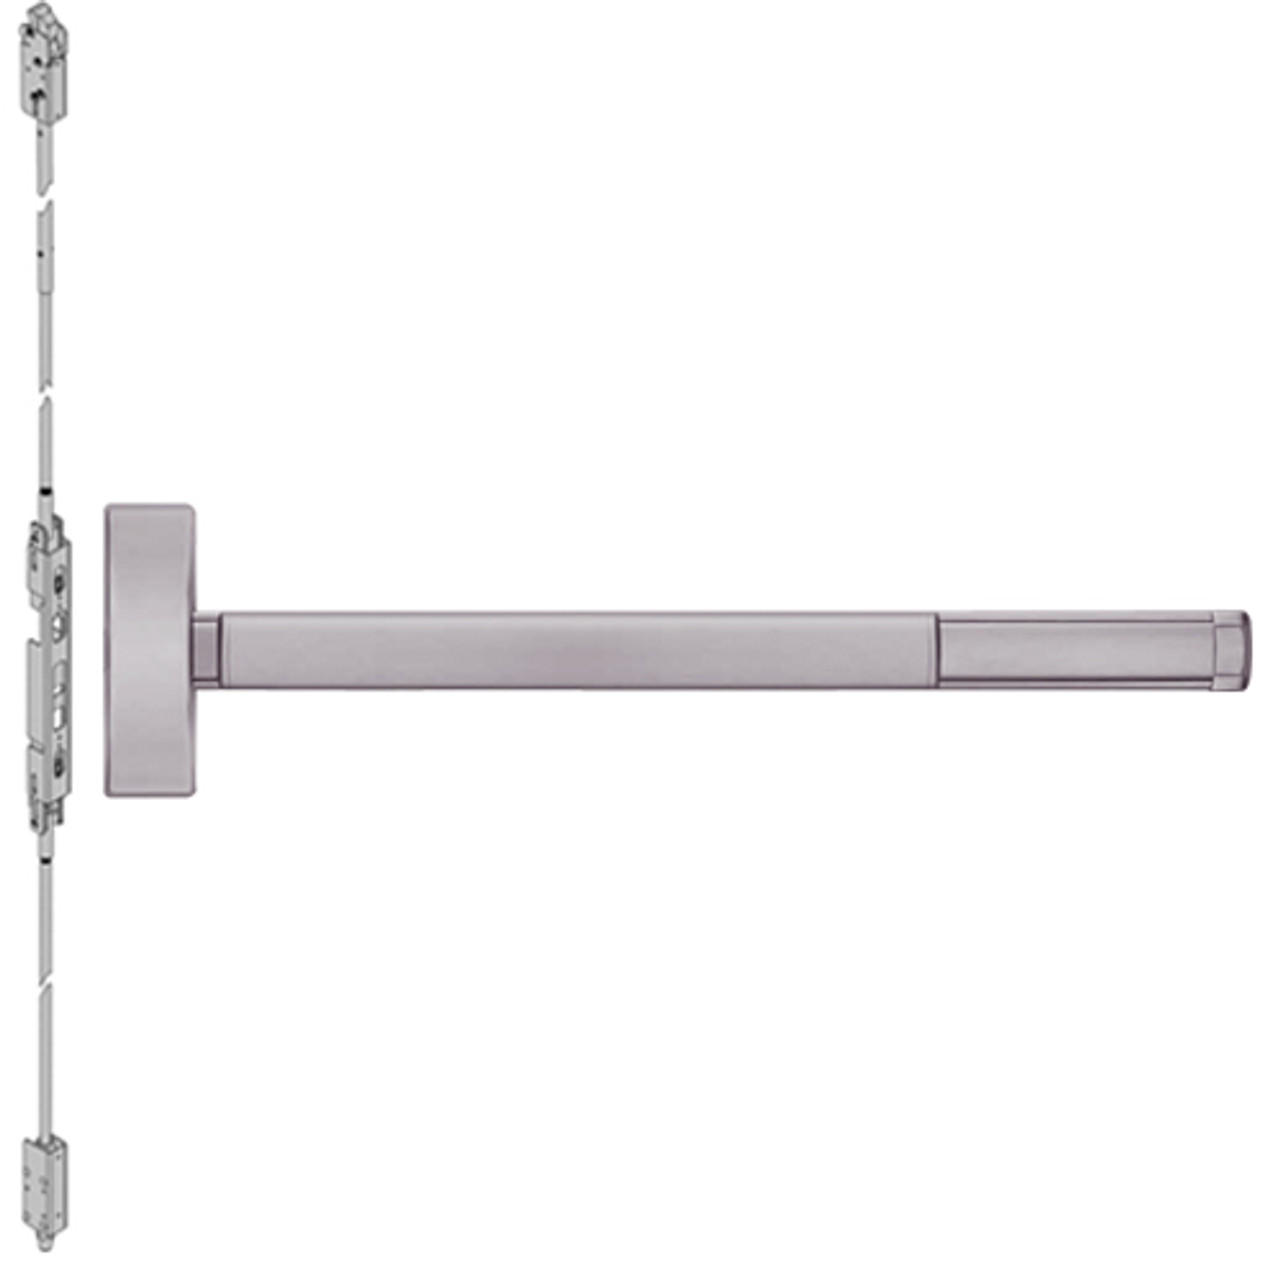 DEFL2814LBR-630-36 PHI 2800 Series Fire Rated Concealed Vertical Rod Exit Device with Delayed Egress Prepped for Lever-Knob Always Active in Satin Stainless Steel Finish